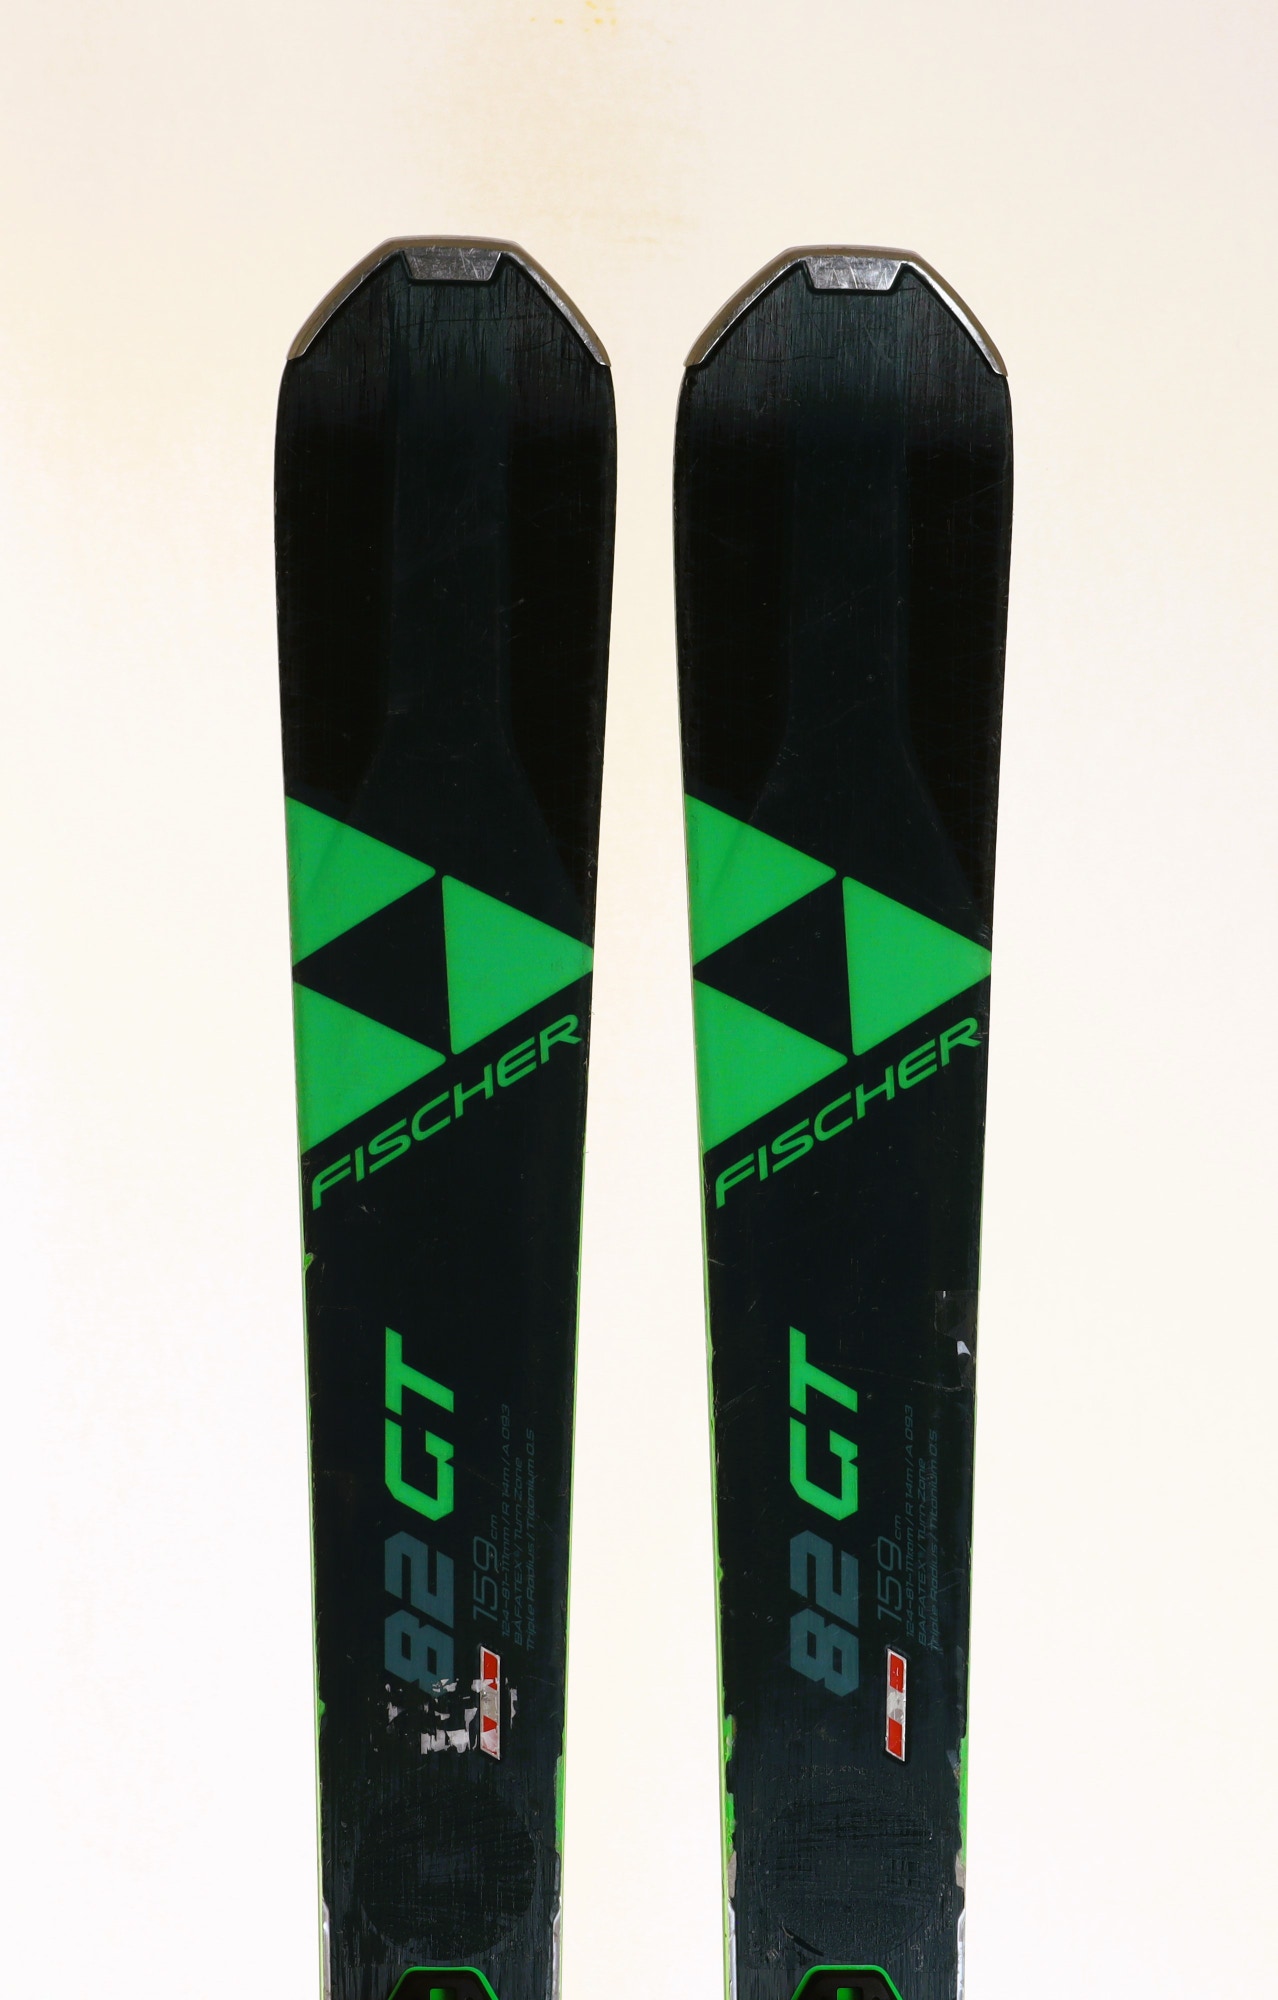 Used 2021 Fischer RC One 82 GT Demo Ski with Fischer RSW 11 Bindings Size 159 (Option 231229)